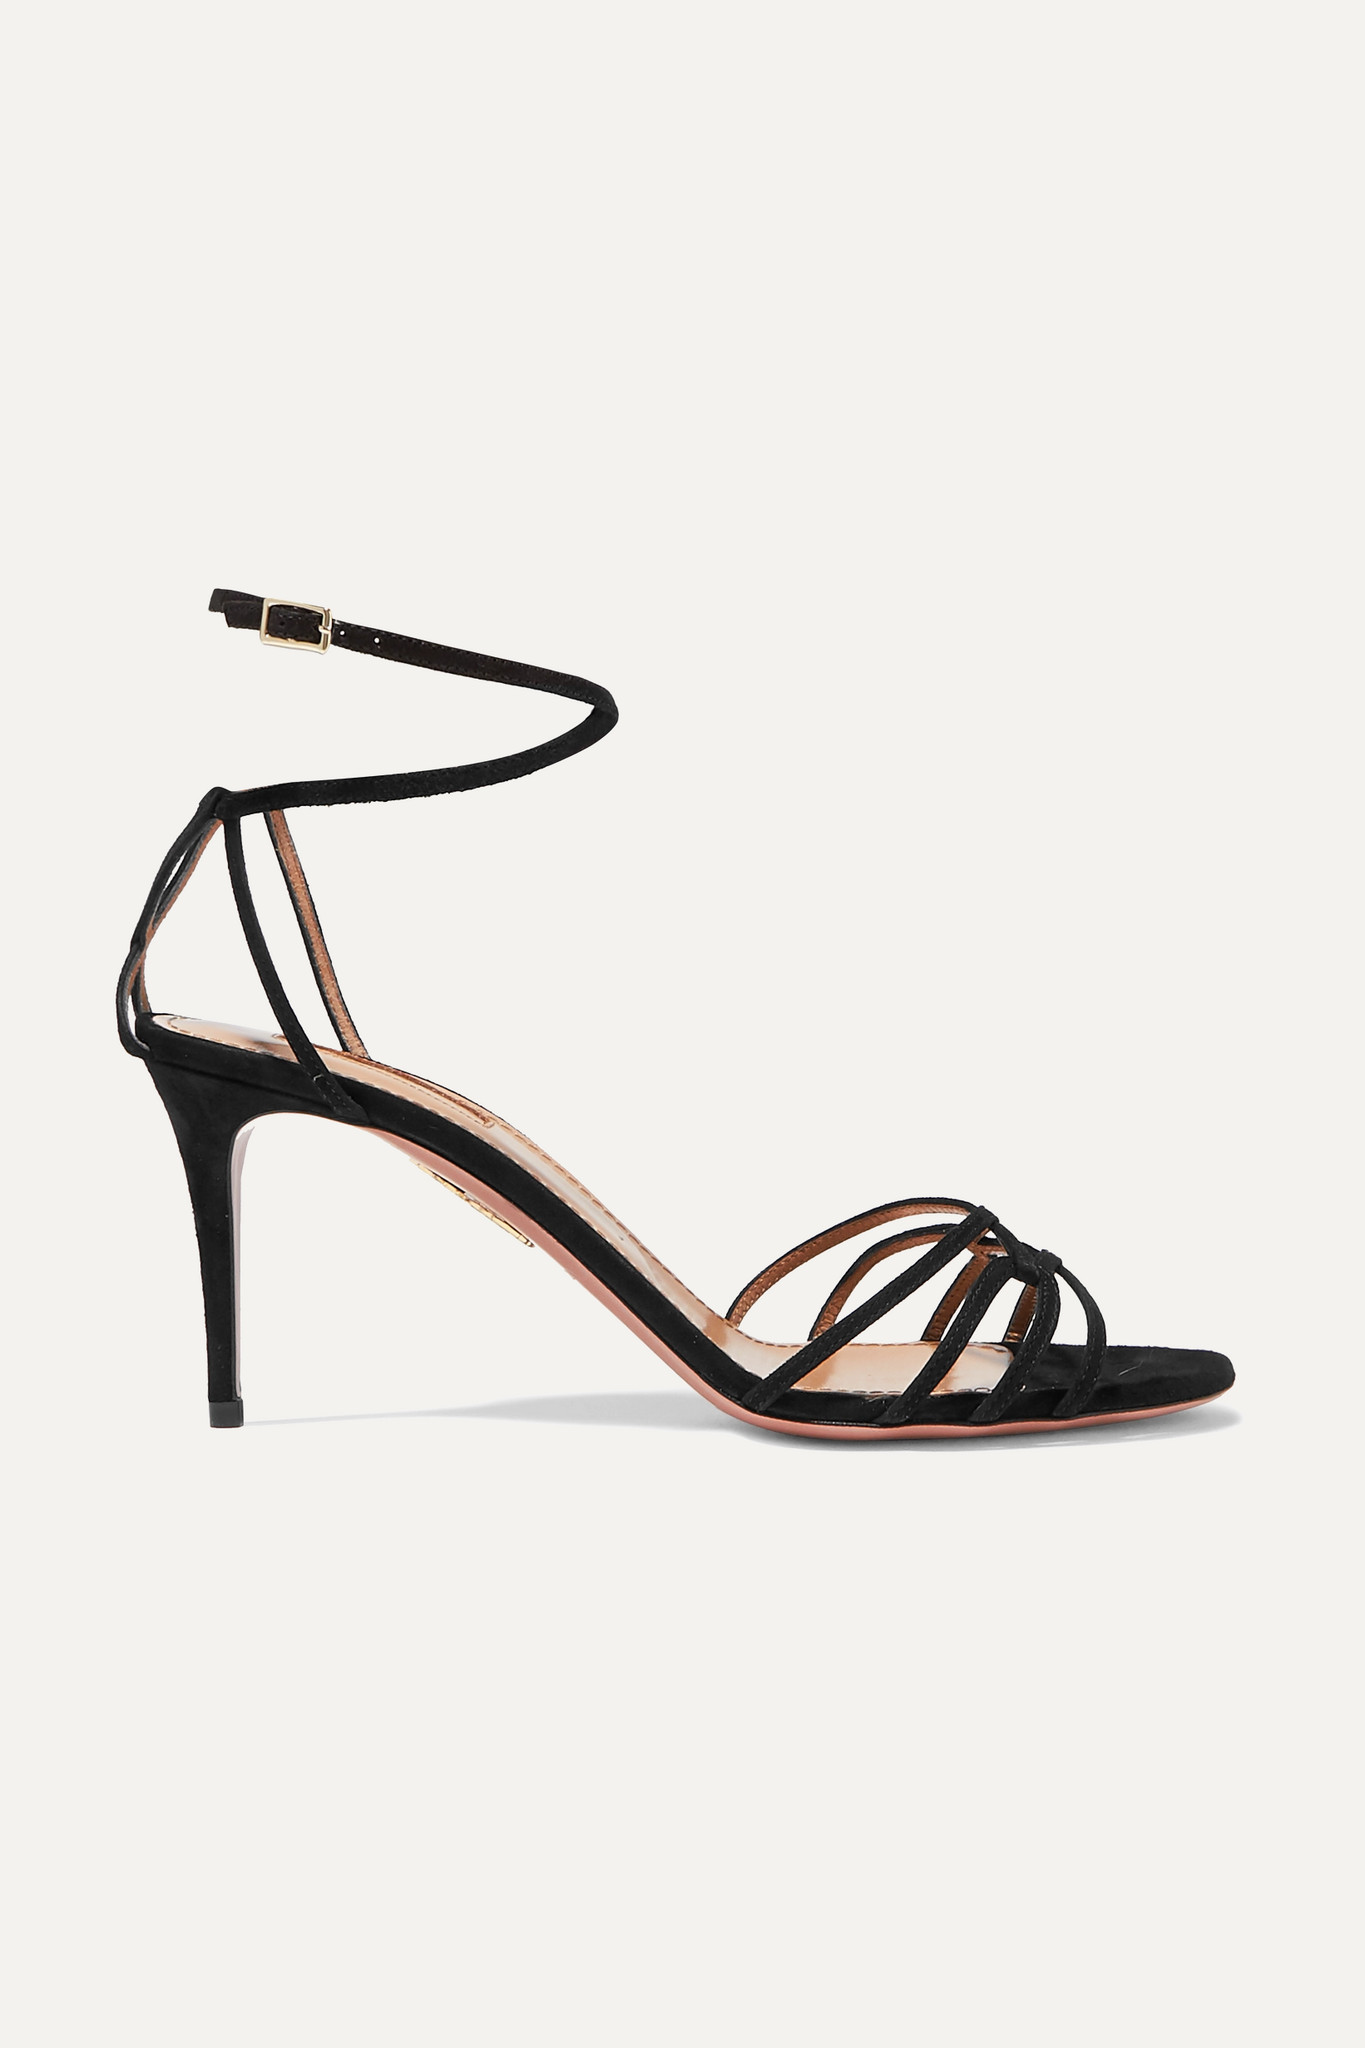 Aquazzura - Very First Kiss 75 Suede Sandals - Black | ABOUT ICONS